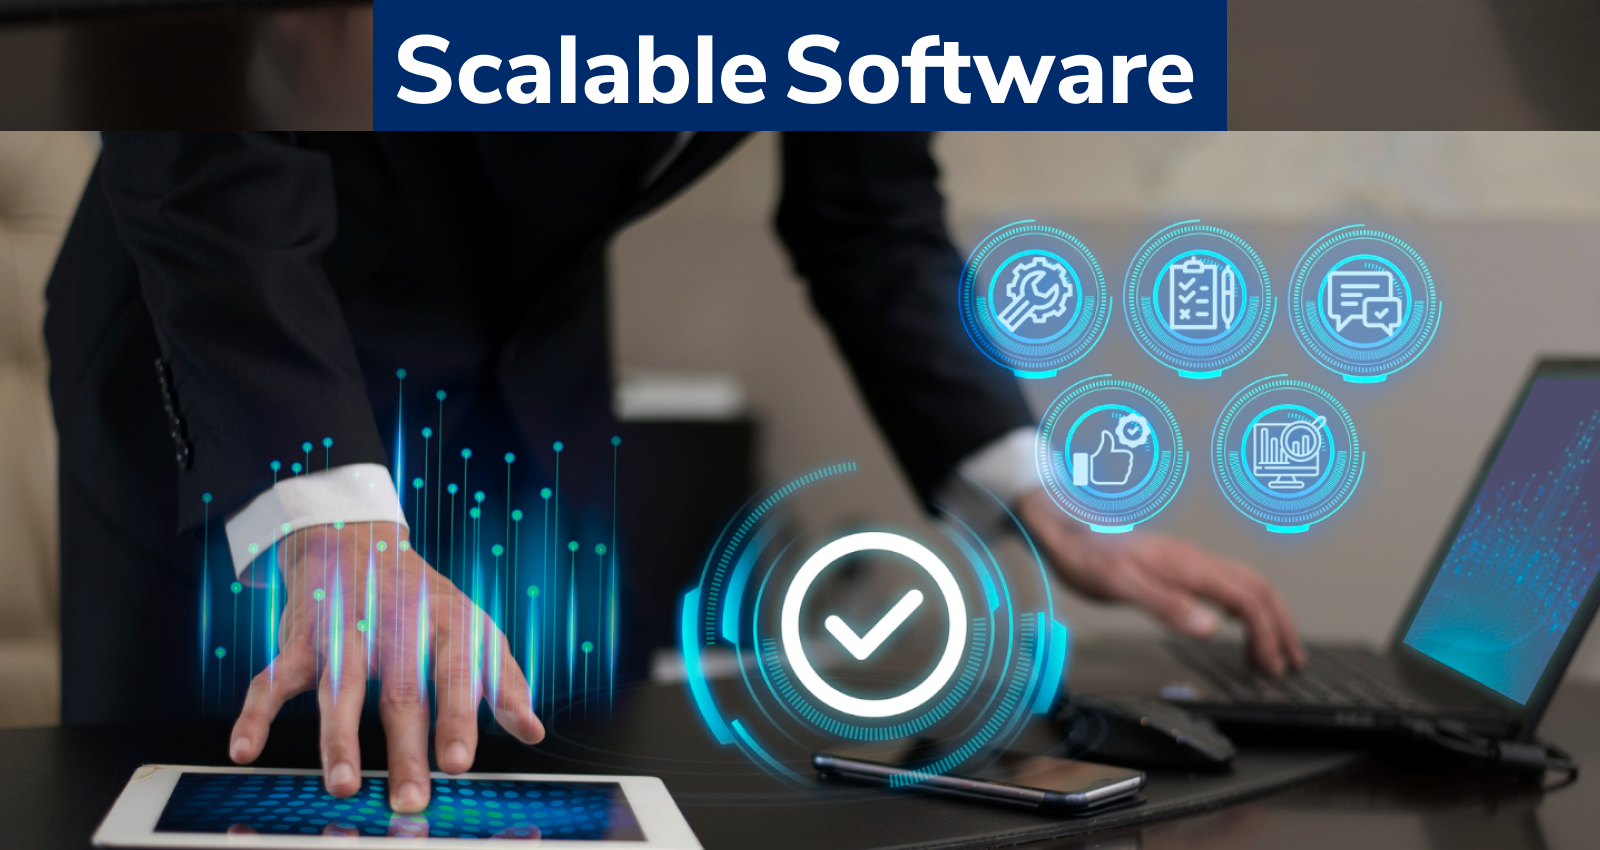 Development of Software product, Product Scaling, Key-challenges in developing software product, Solutions to develop a product, steps to develop a scalable software product